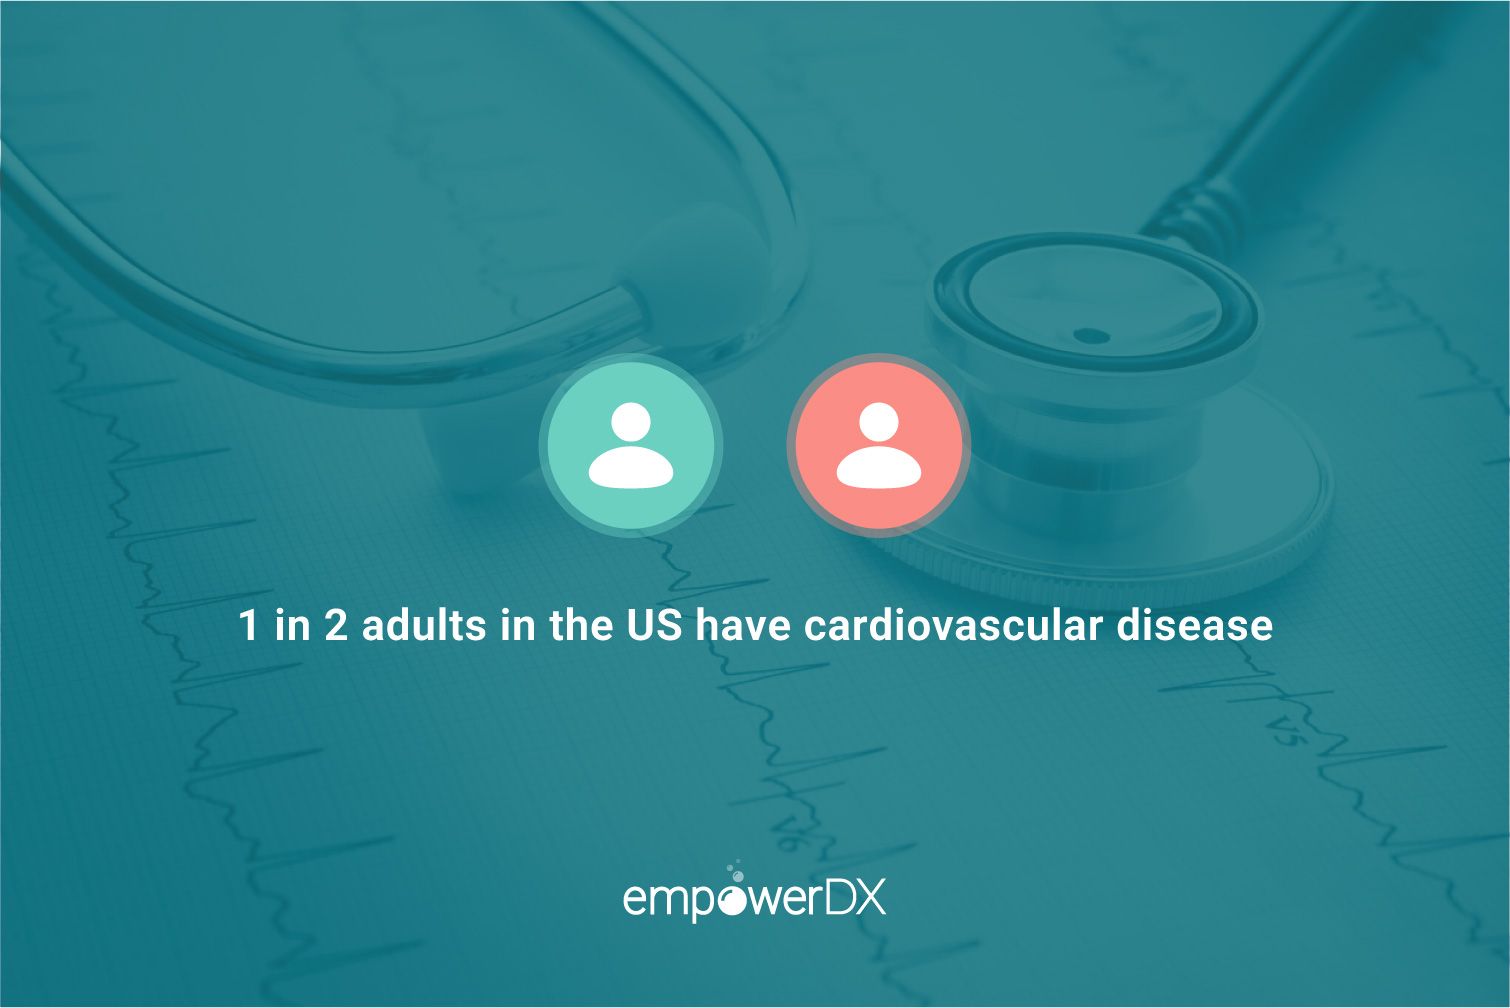 1 in 2 adults have heart disease_with LOGO_edx-blog-header-image_v1.0-01.jpg